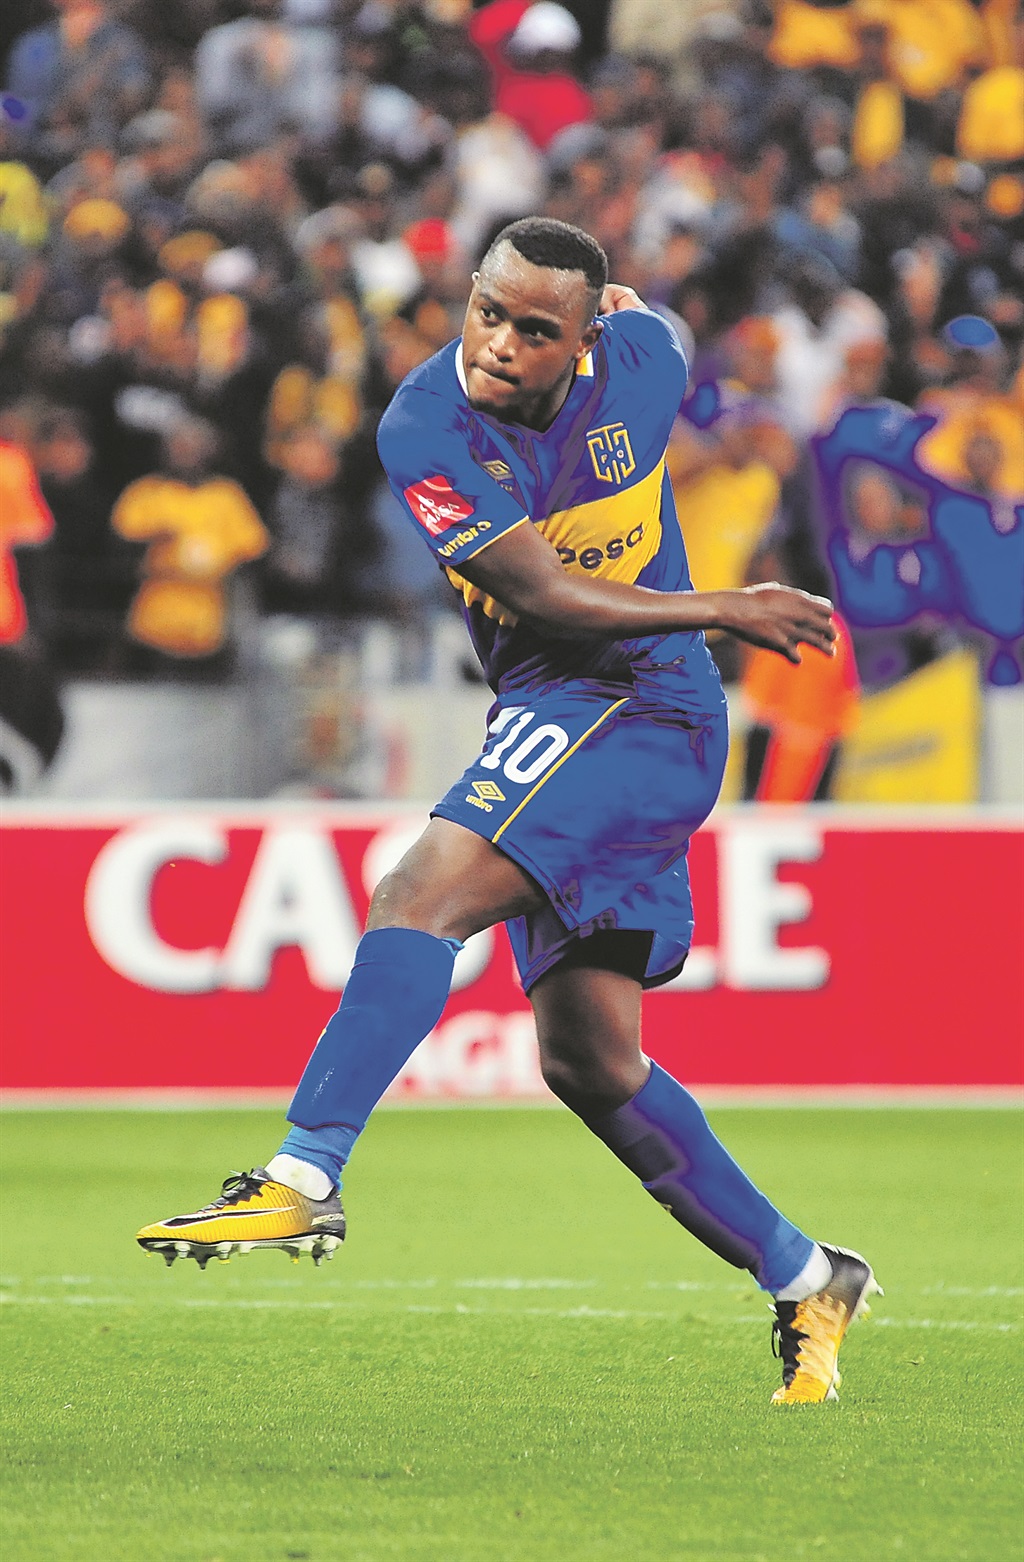 Cape Town City midfielder Ayanda Patosi is hoping to win his first domestic trophy. ­Photo by Grant Pitcher/Gallo Images.